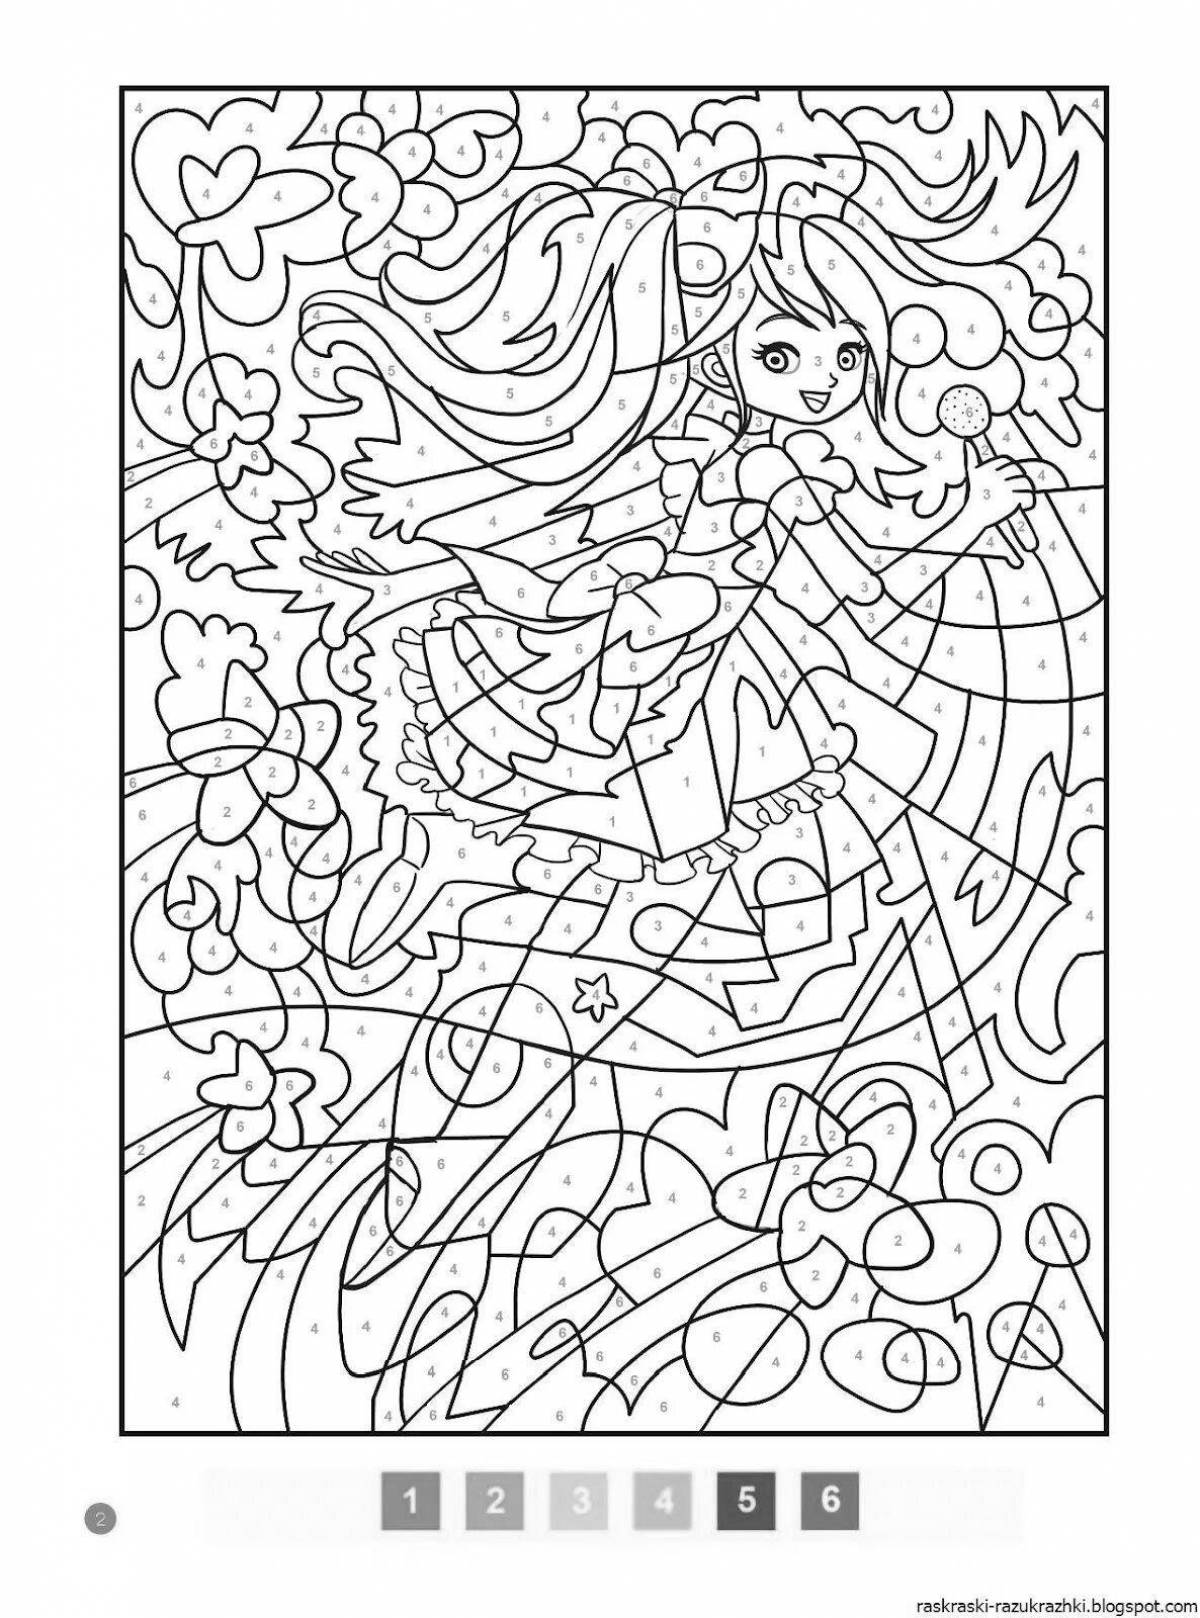 Entertaining phone games by numbers coloring book